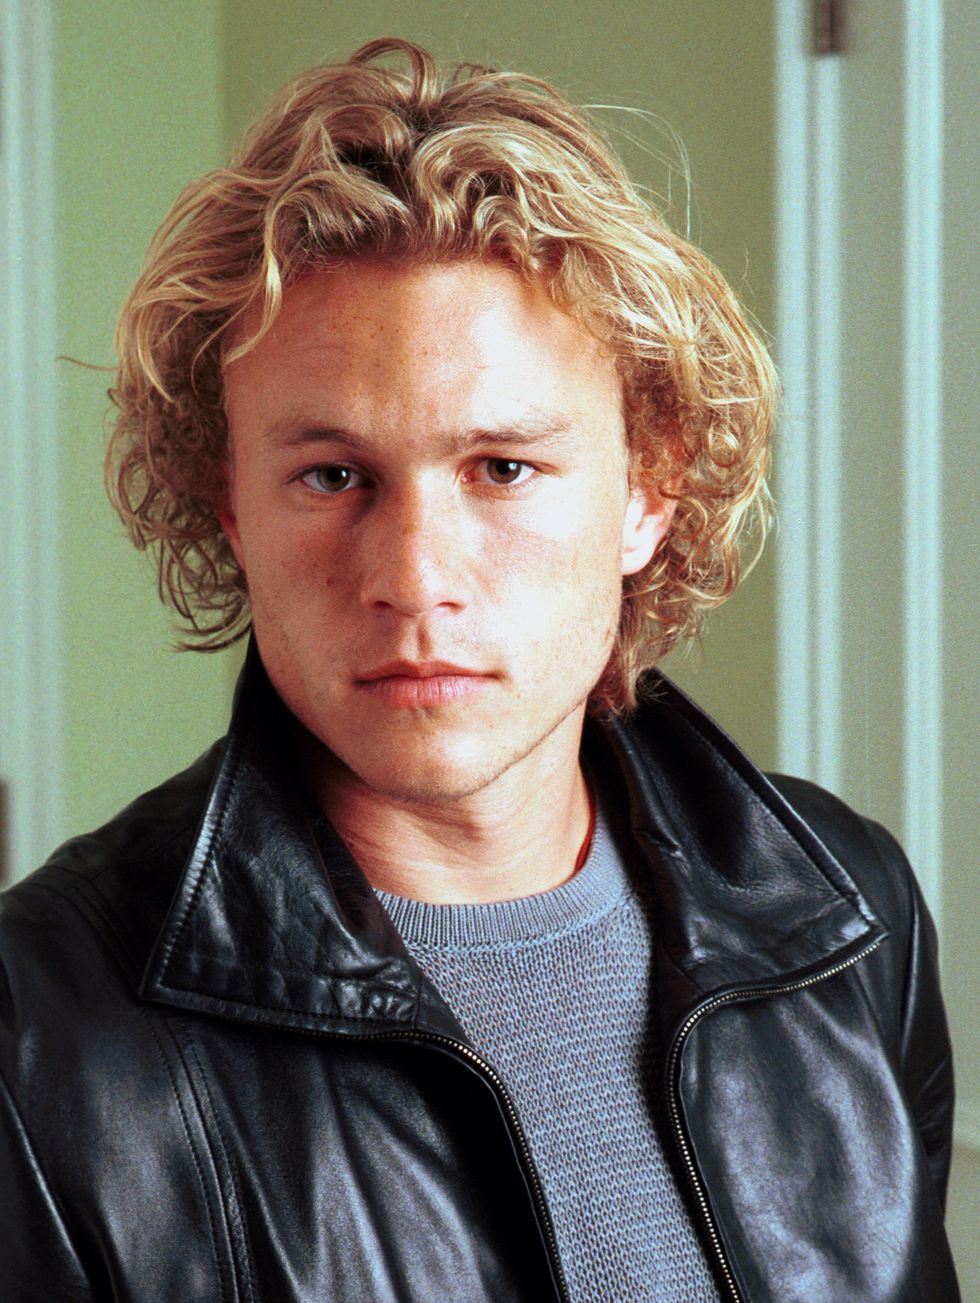 Hair, Face, Hairstyle, Leather jacket, Leather, Jacket, Blond, Chin, Surfer hair, Forehead, 